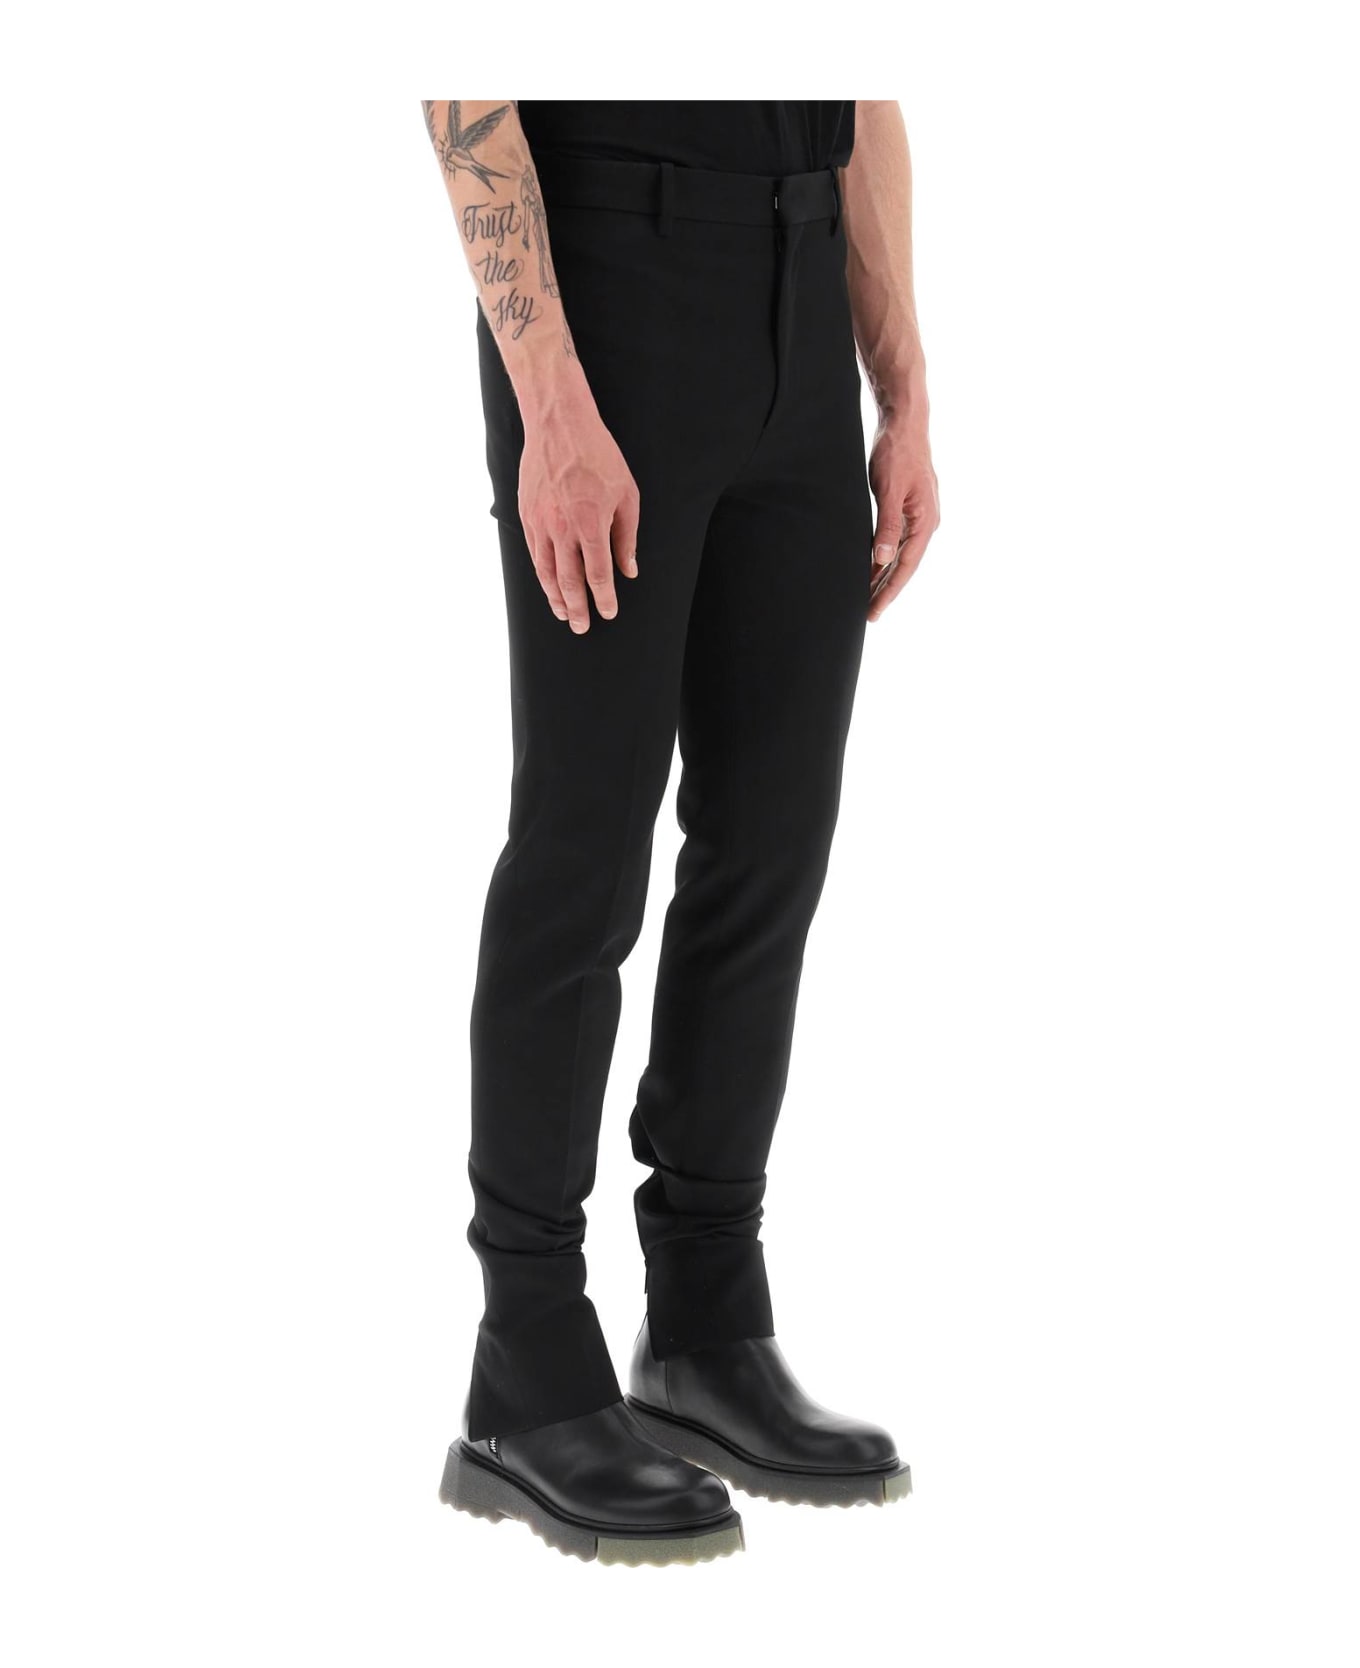 Off-White Slim Tailored Pants With Zippered Ankle - Nero ボトムス